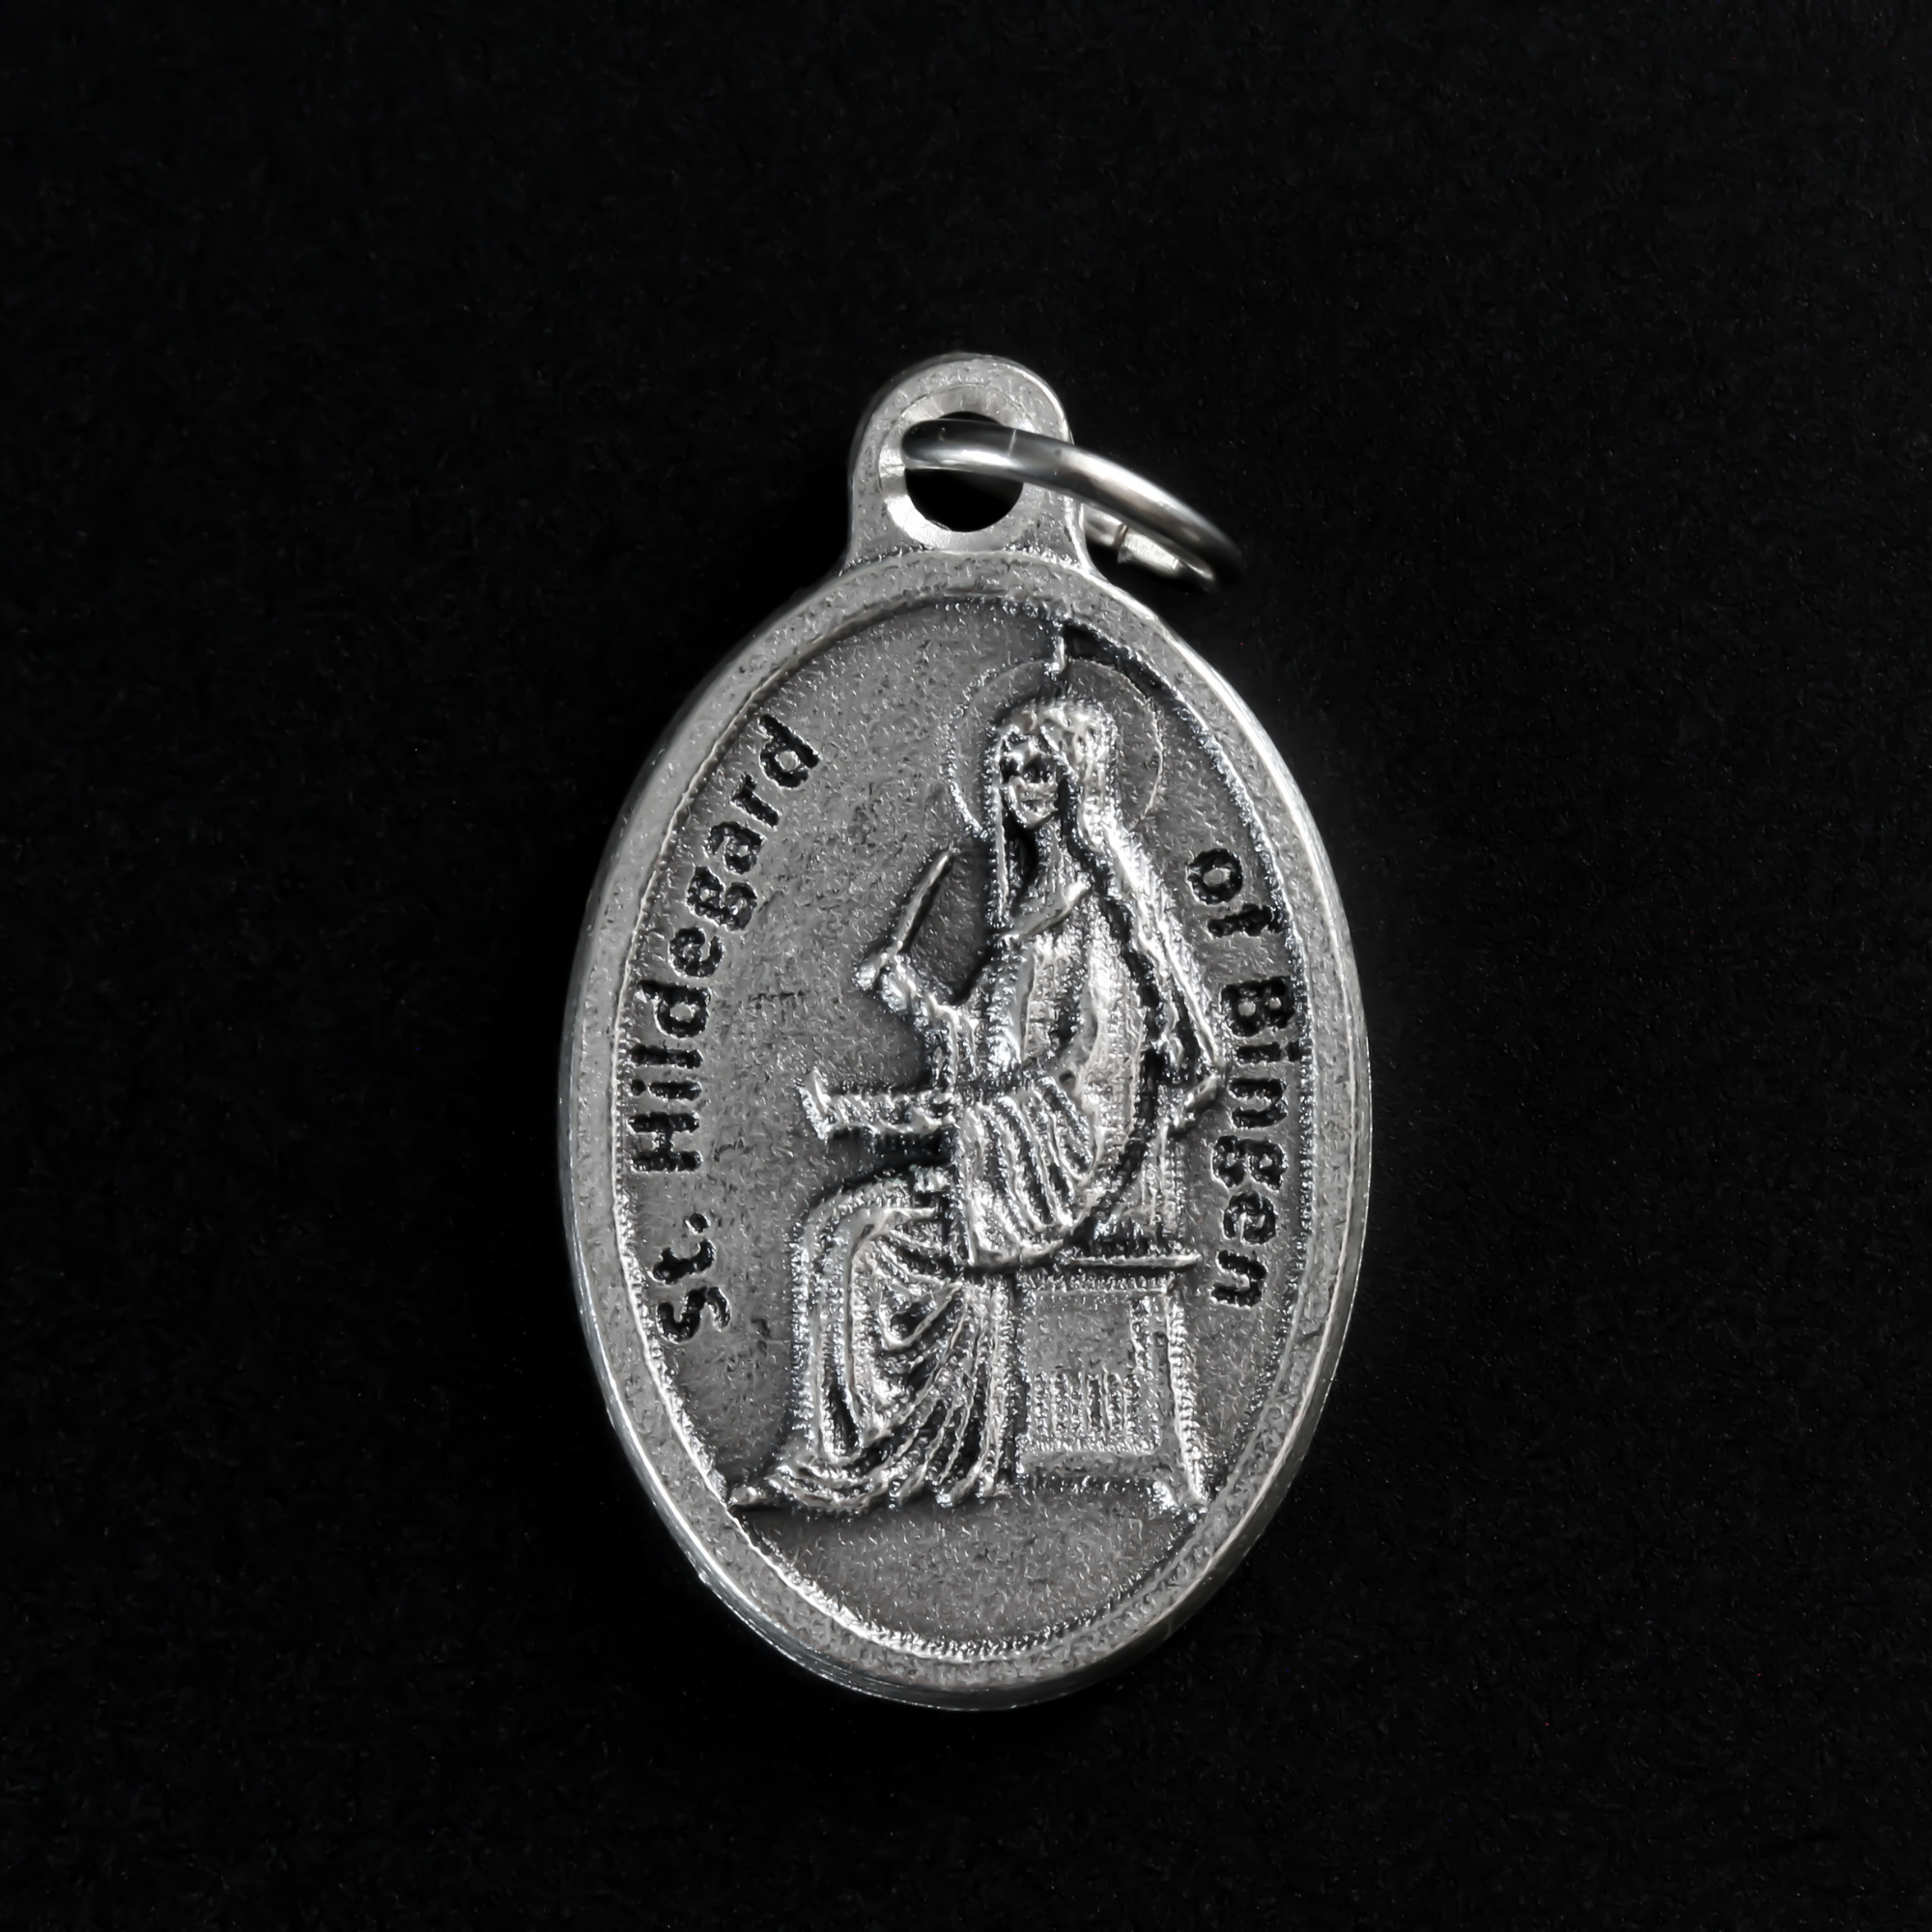 Saint Hildegard medal that depicts the saint on the front and "Pray For Us" on the back.